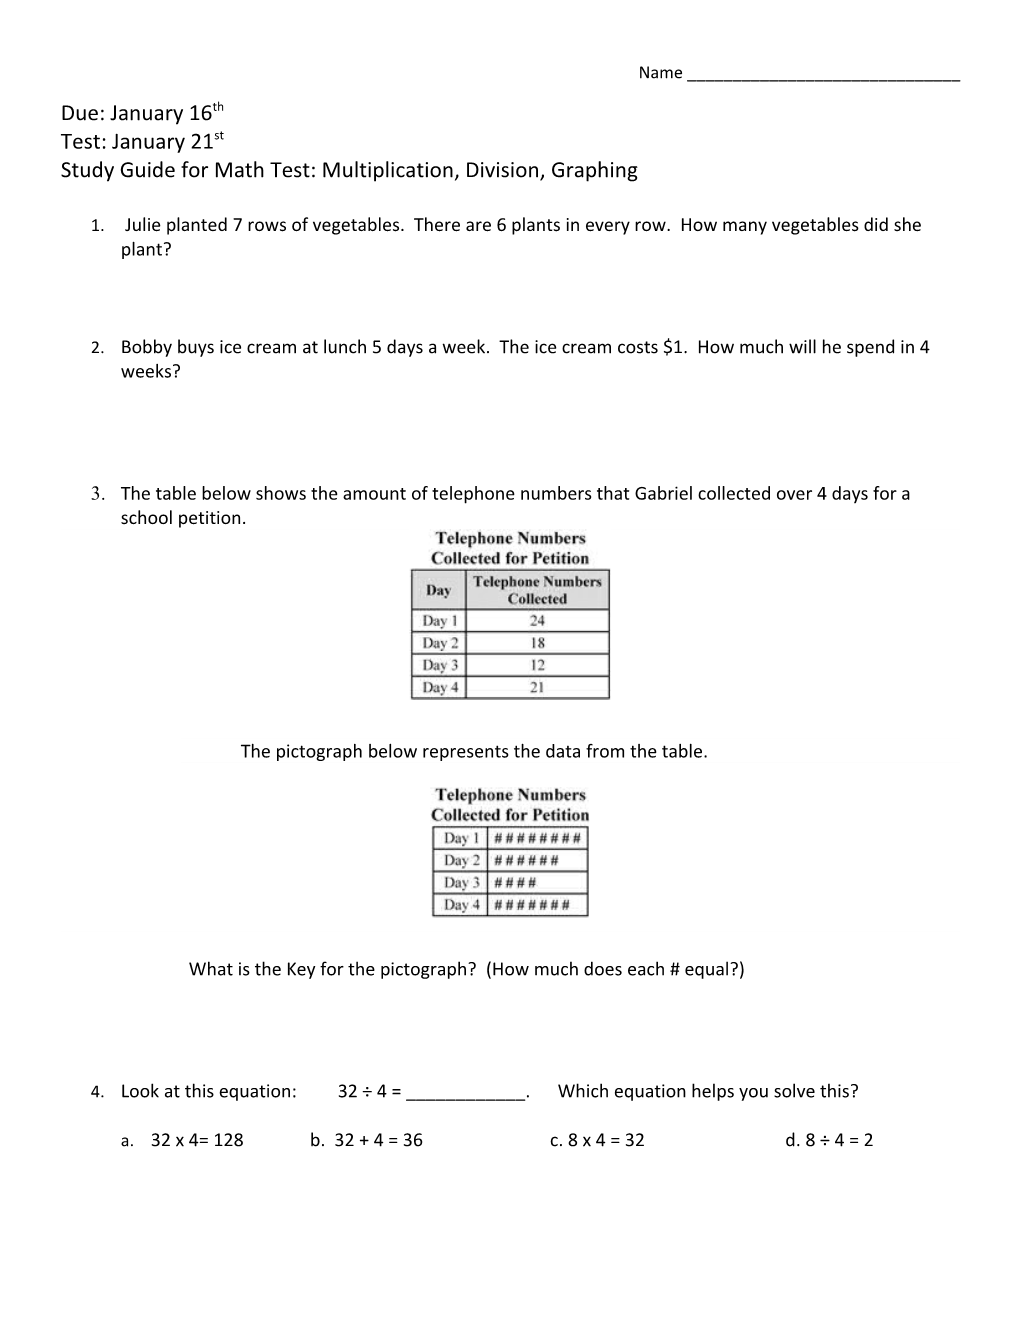 Study Guide for Math Test: Multiplication, Division, Graphing